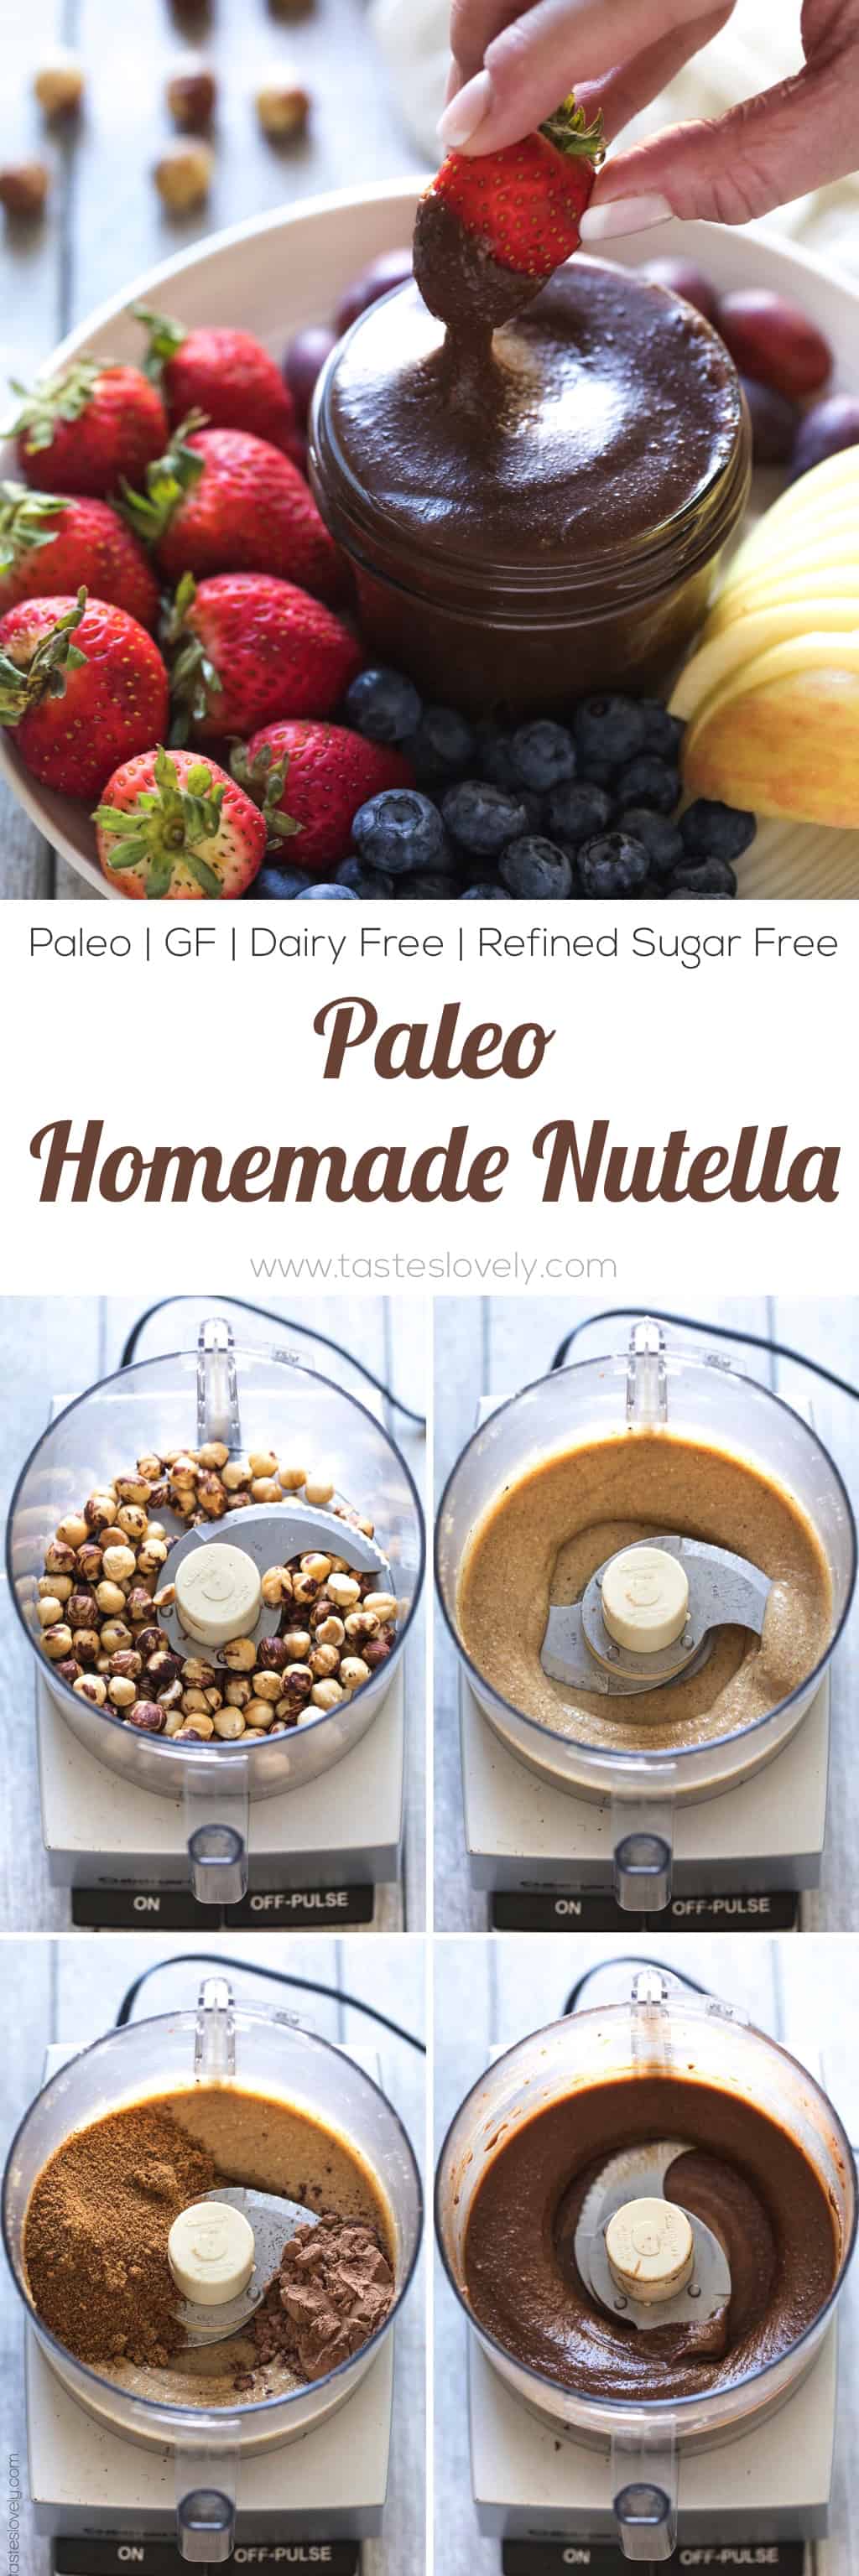 Homemade Paleo Nutella - made with just hazelnuts, cocoa powder and coconut sugar! A much healthier Nutella copycat hazelnut spread that is paleo, dairy free, refined sugar free, gluten free, grain free and clean eating.